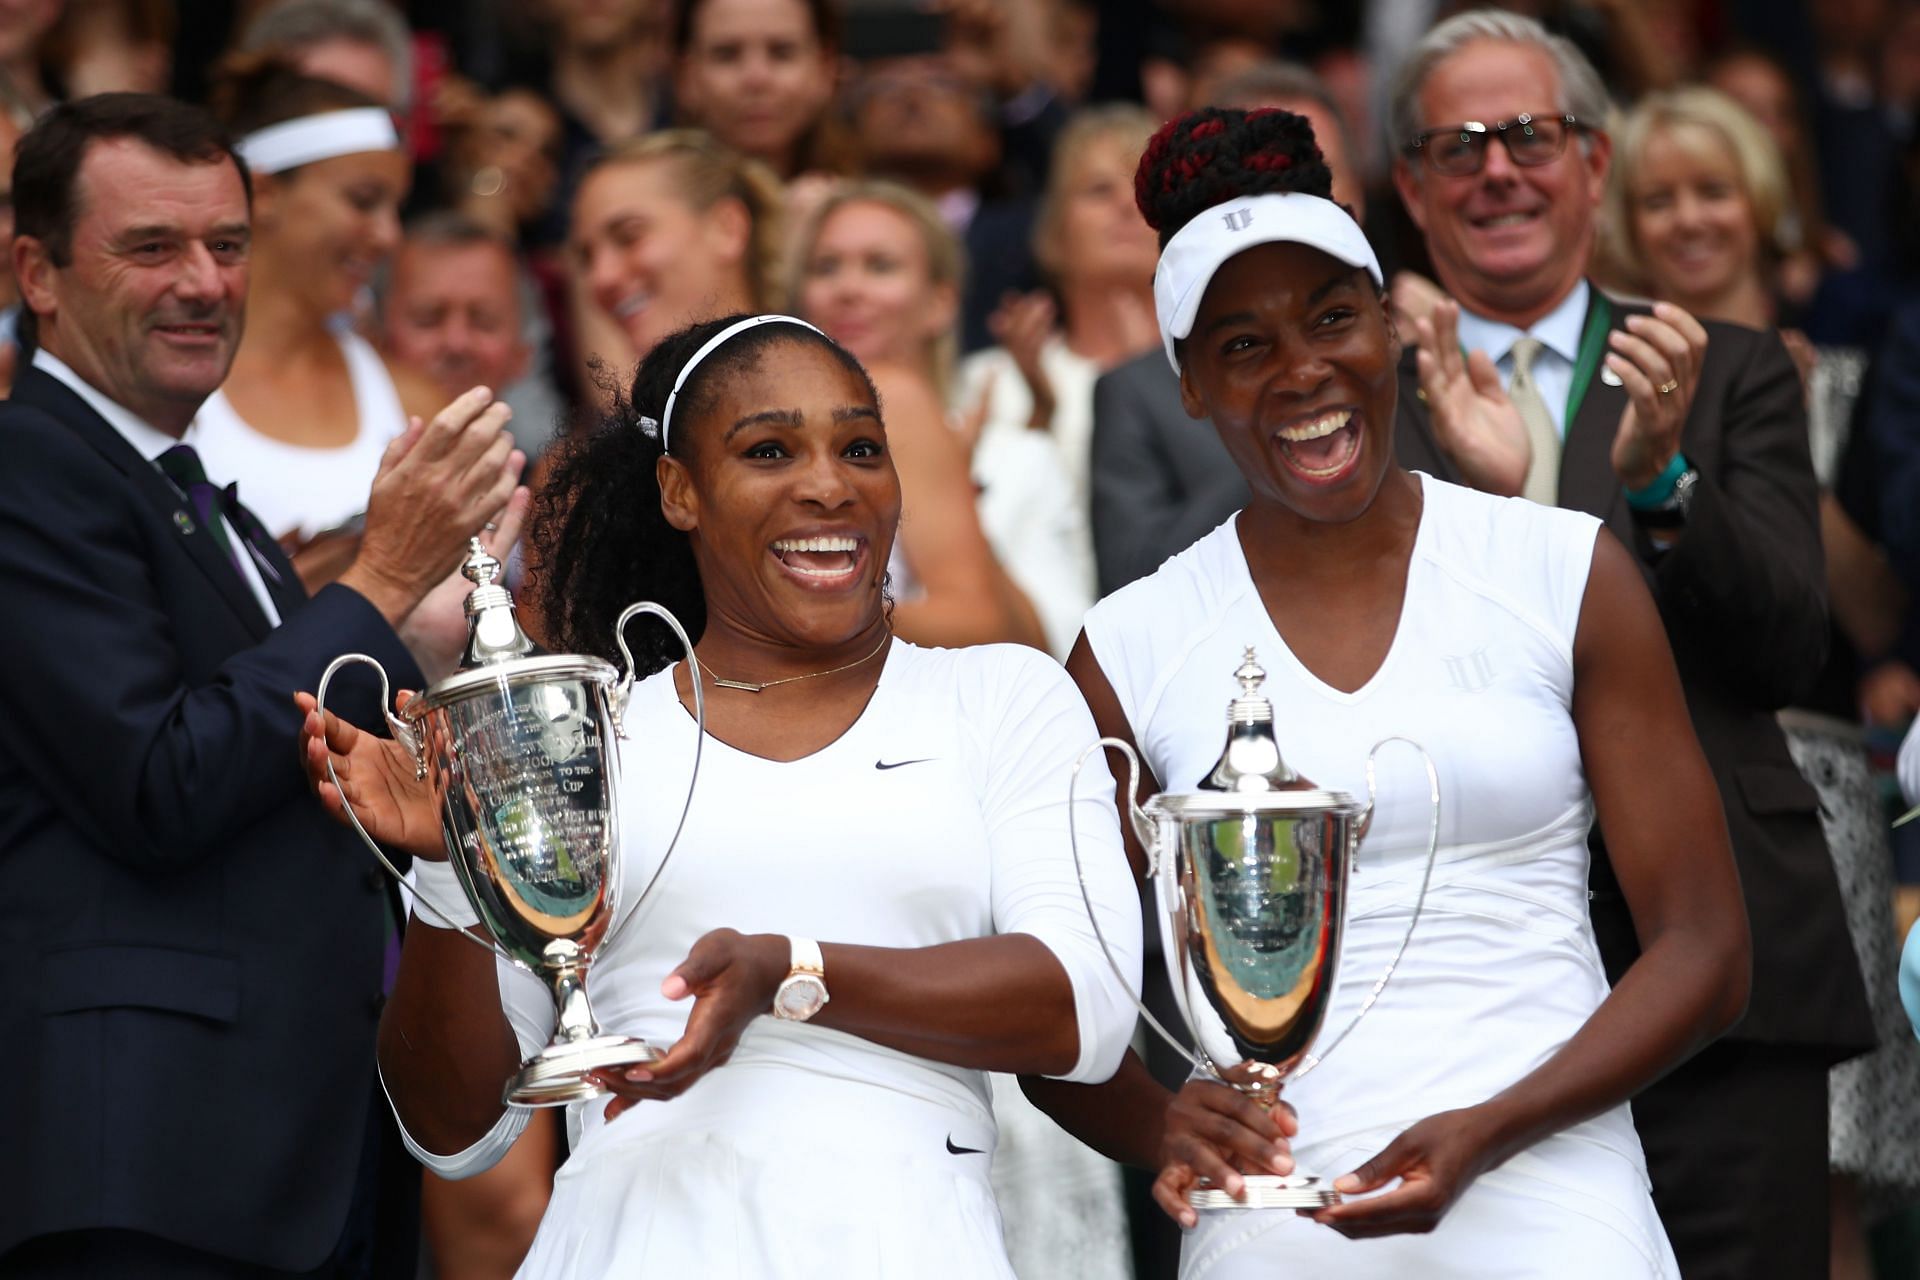 Venus and Serena Williams have fought against institutions of racism and sexism all their life